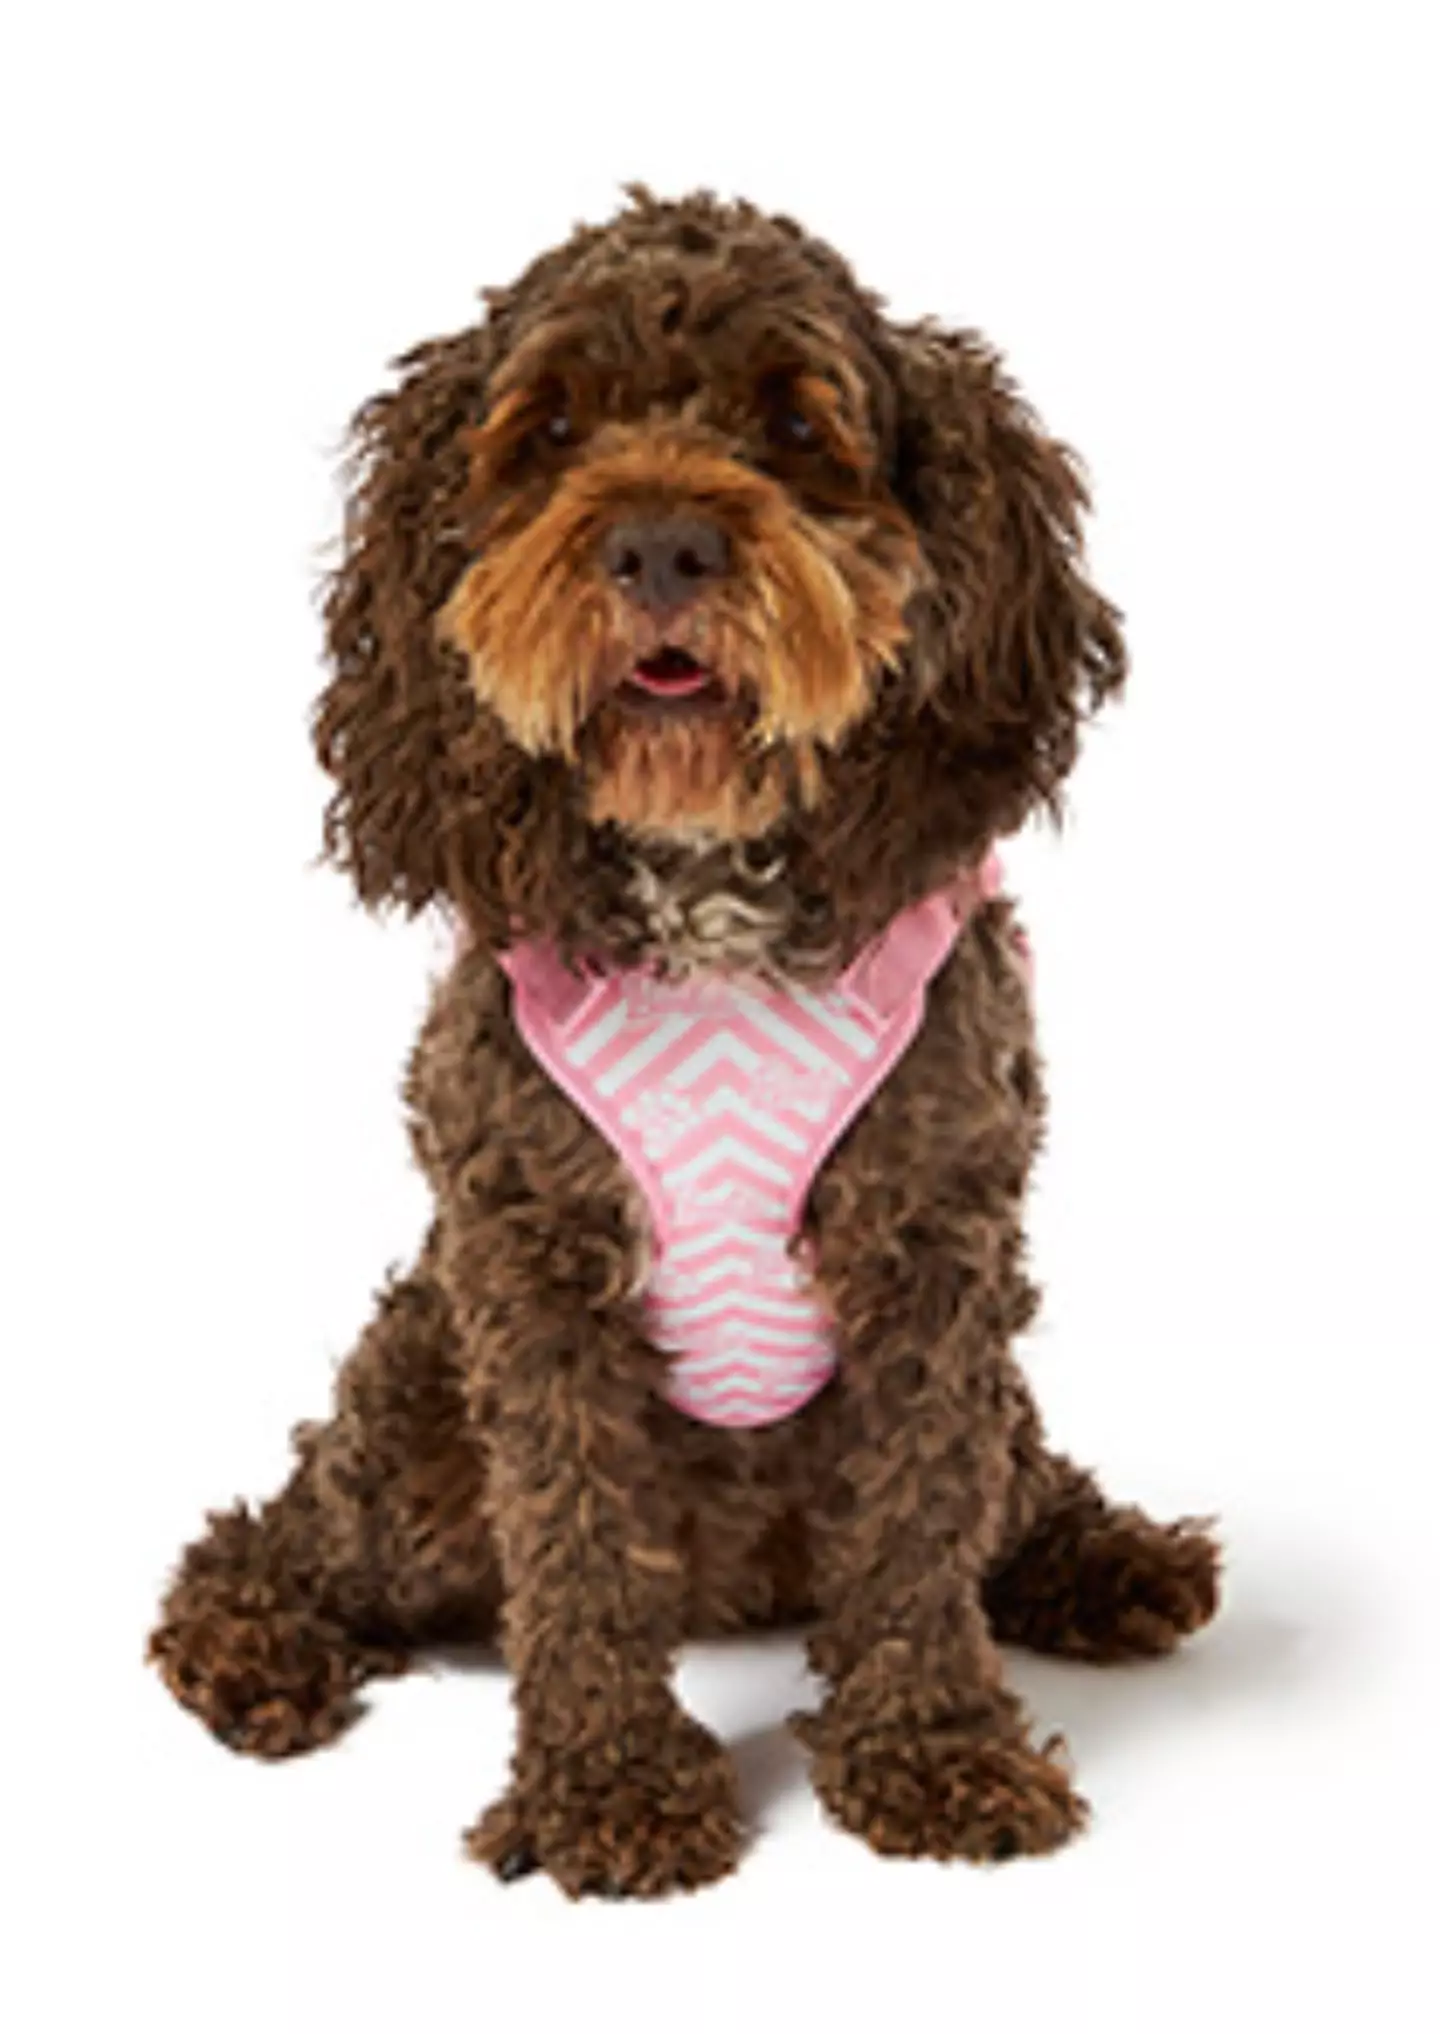 Your dog can live in a Barbie world this summer.